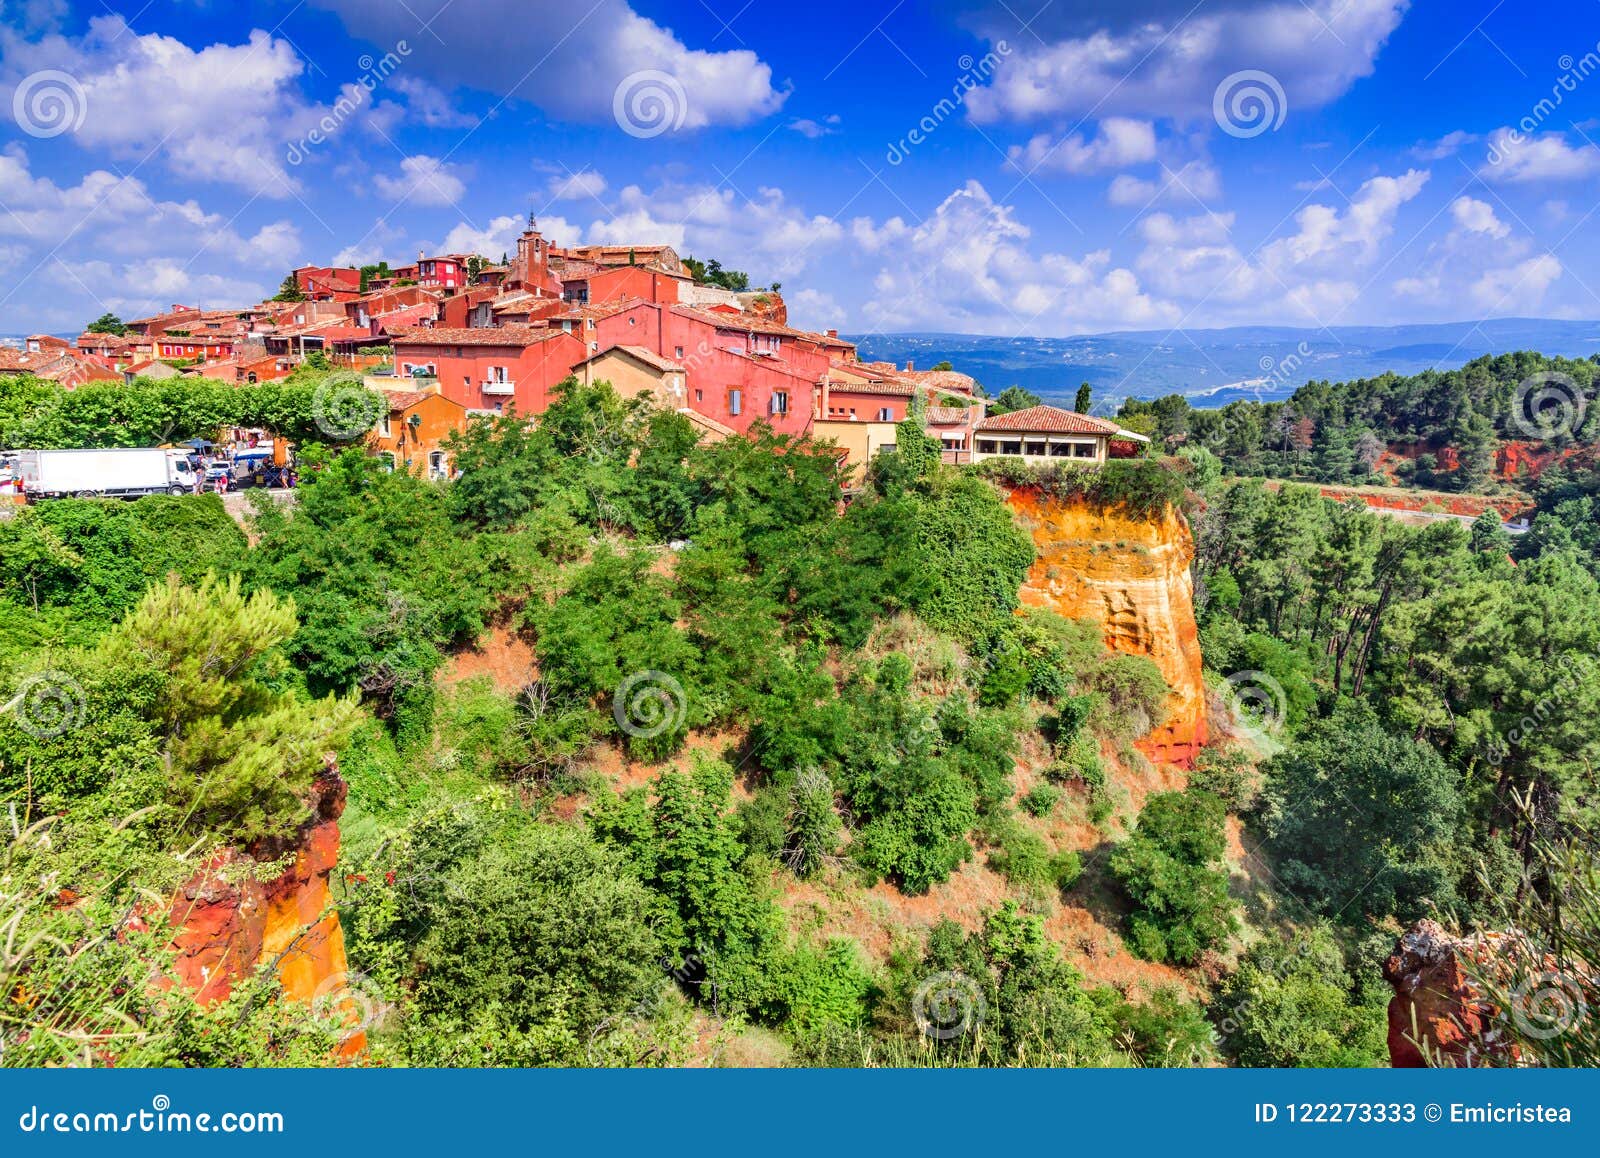 roussillon, provence in france